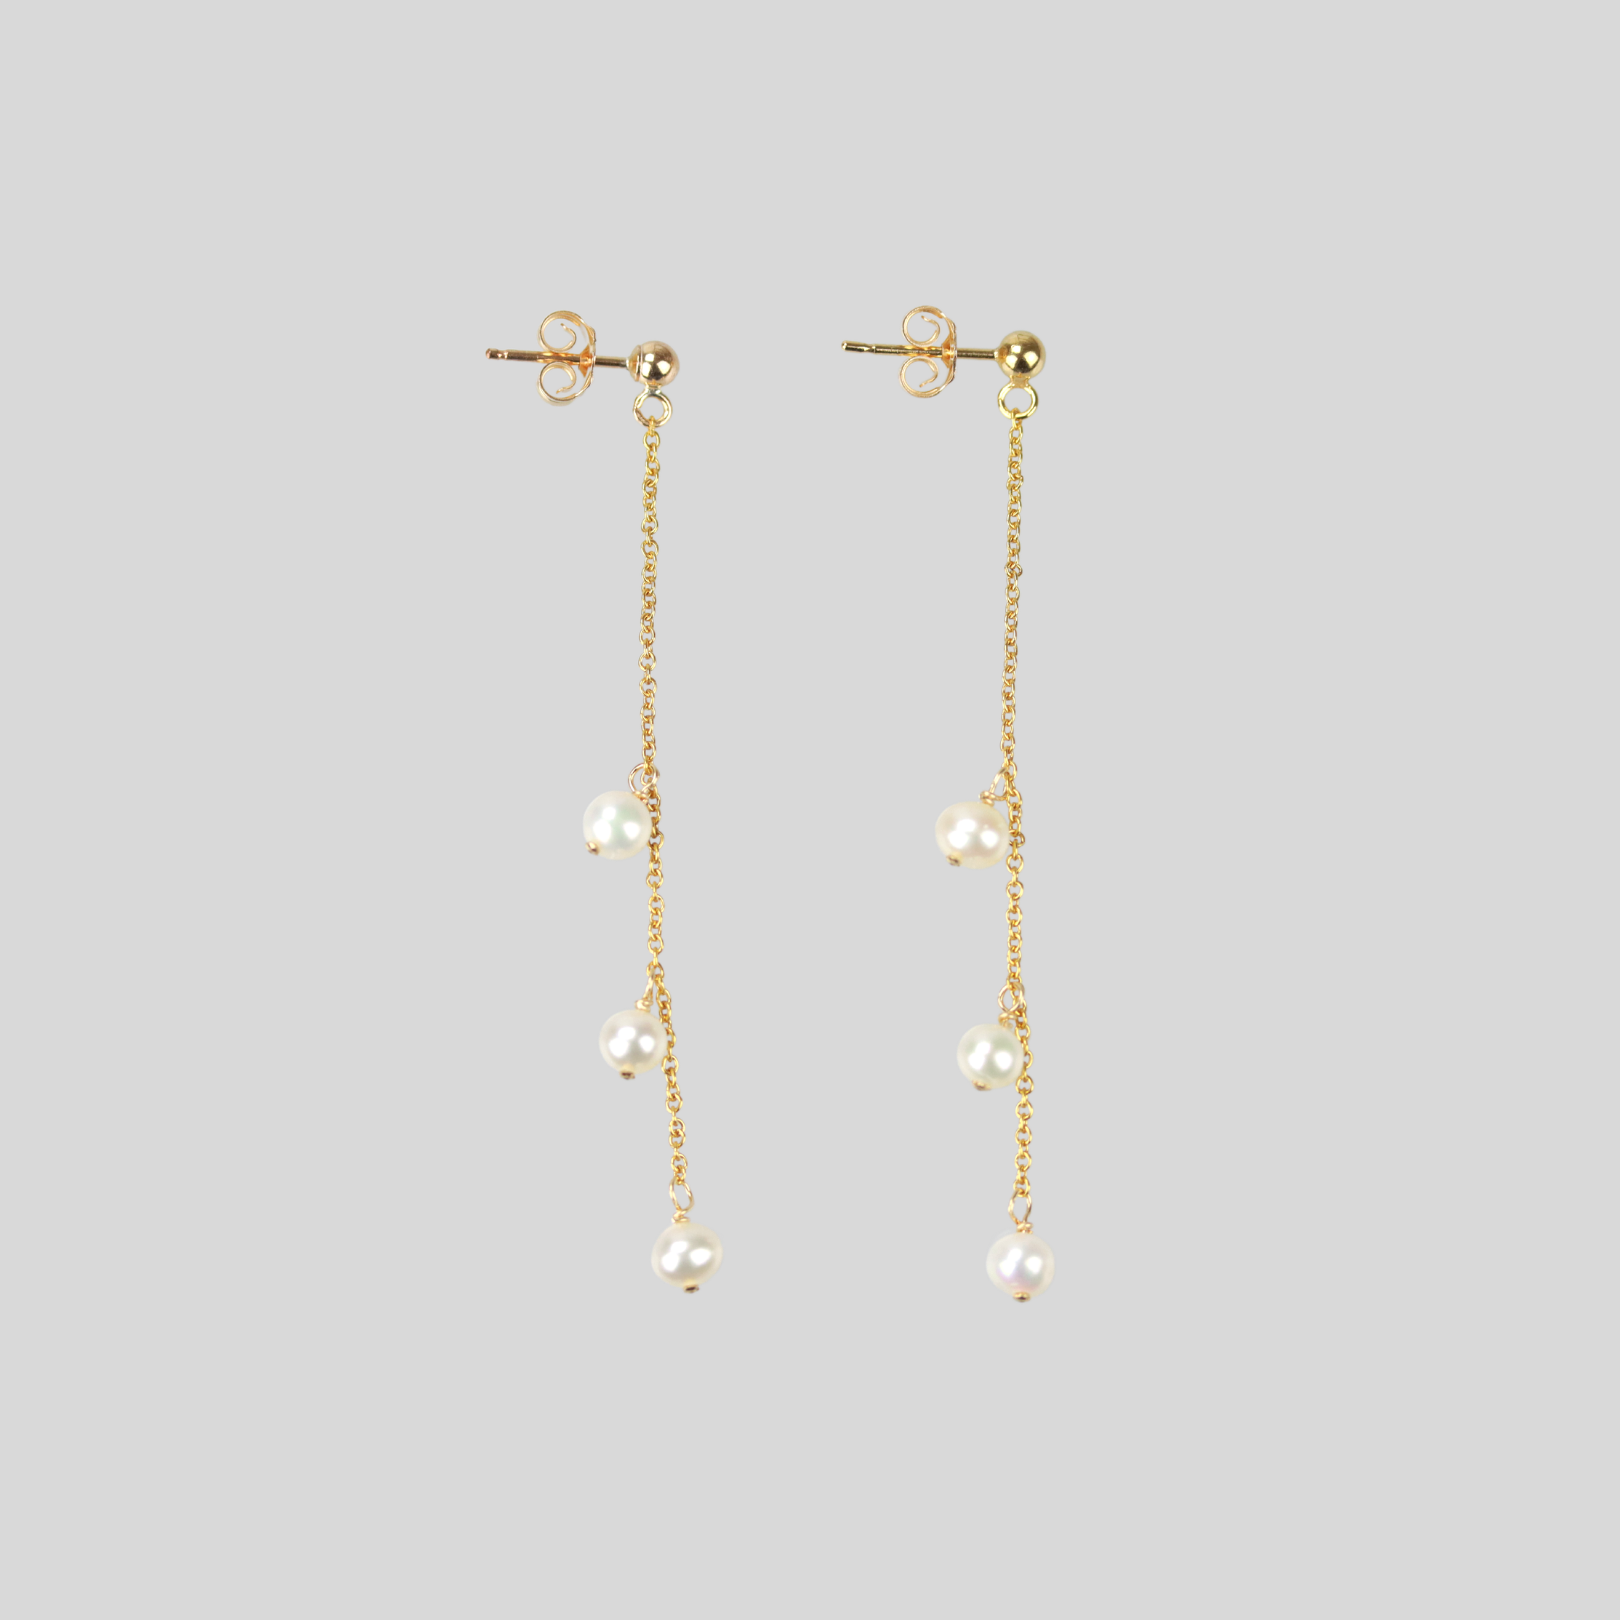 Dainty Seed Pearl Earrings | Drop & Dangle with Fish-hook | Gold Earrings with Pearls